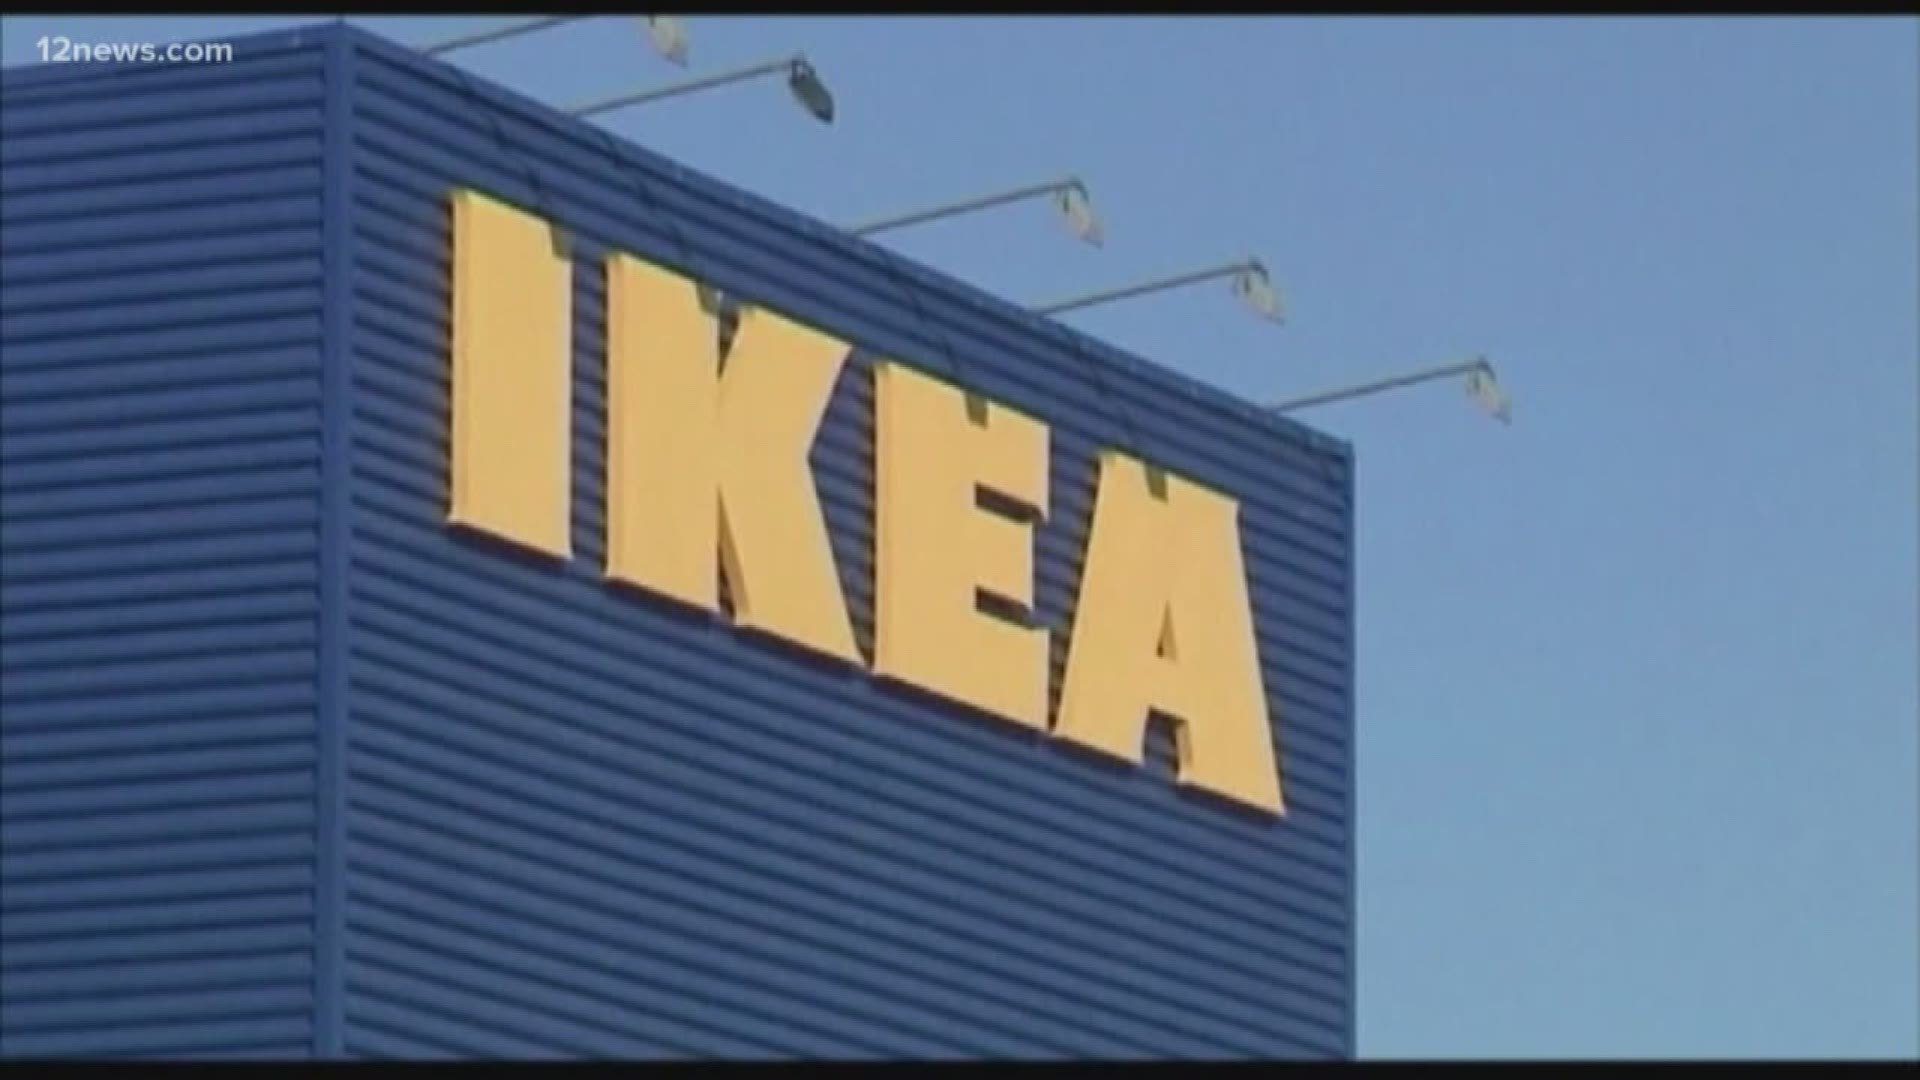 IKEA won't be moving forward with a number of projects around the U.S. as it focuses on online shopping.